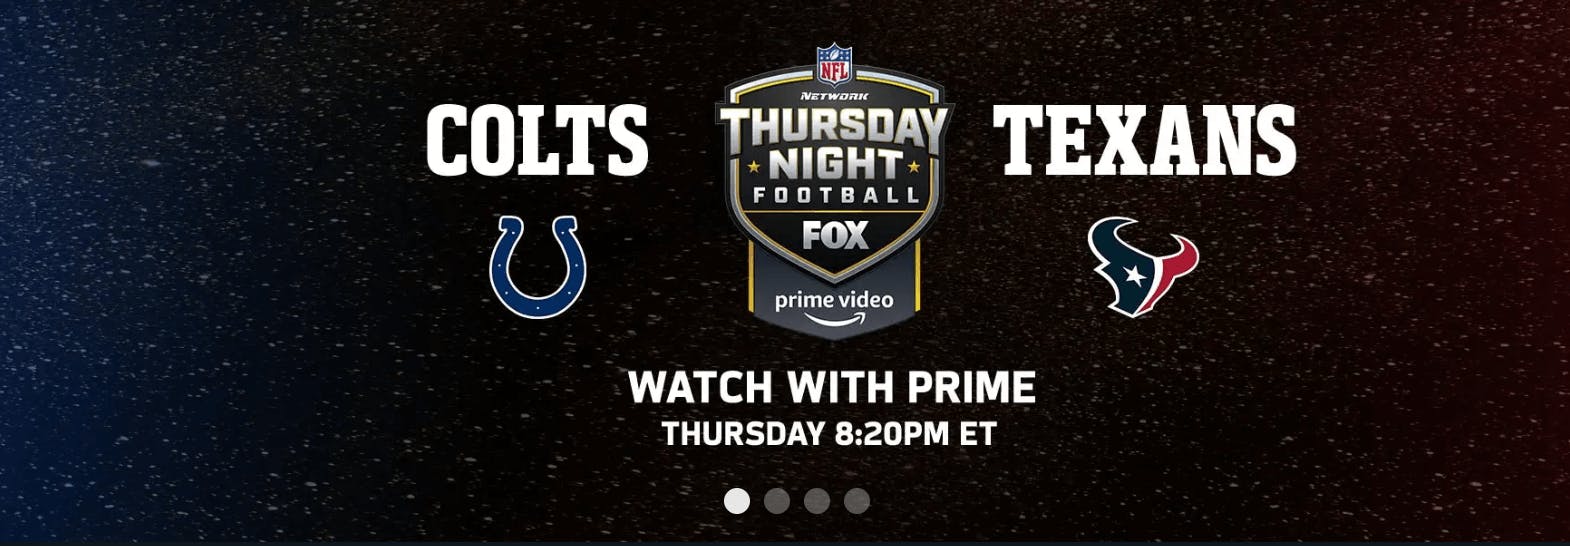 colts texans amazon streaming nfl